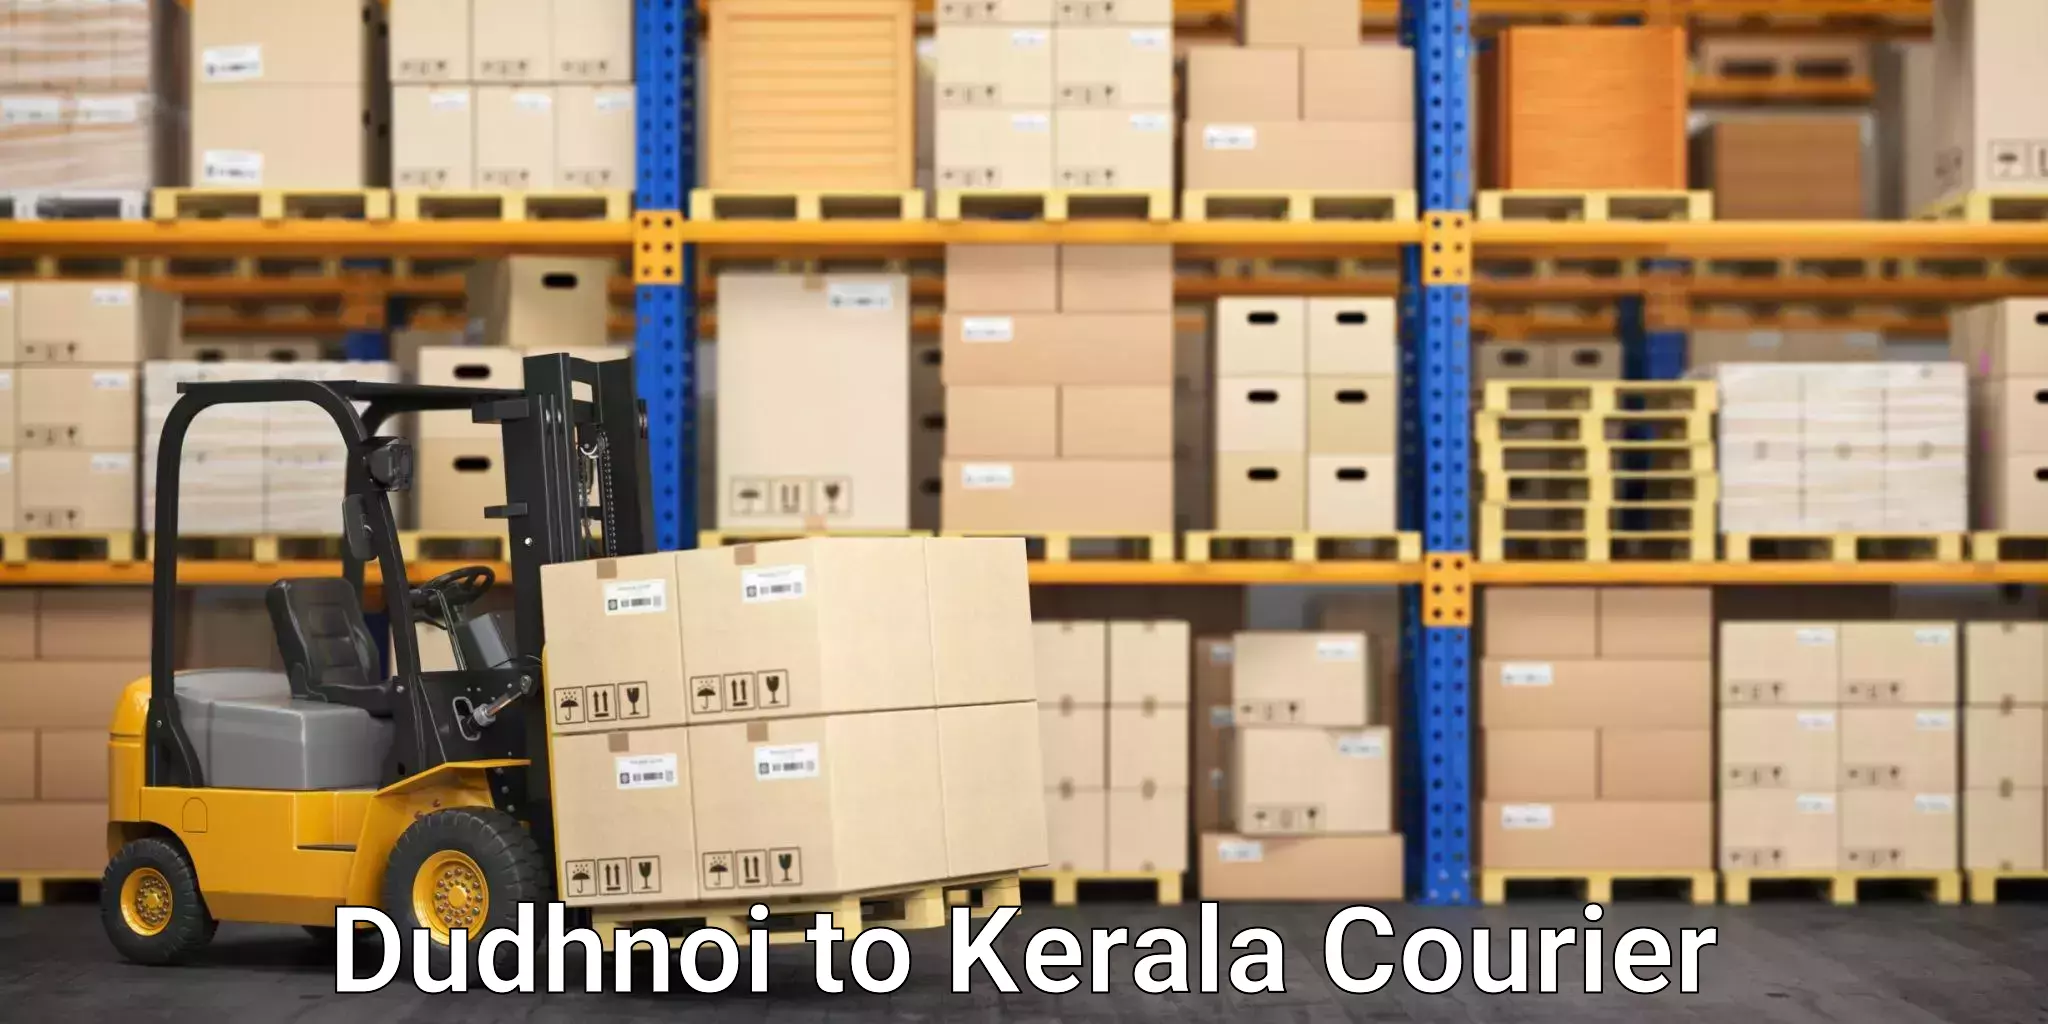 Advanced parcel tracking in Dudhnoi to Kerala